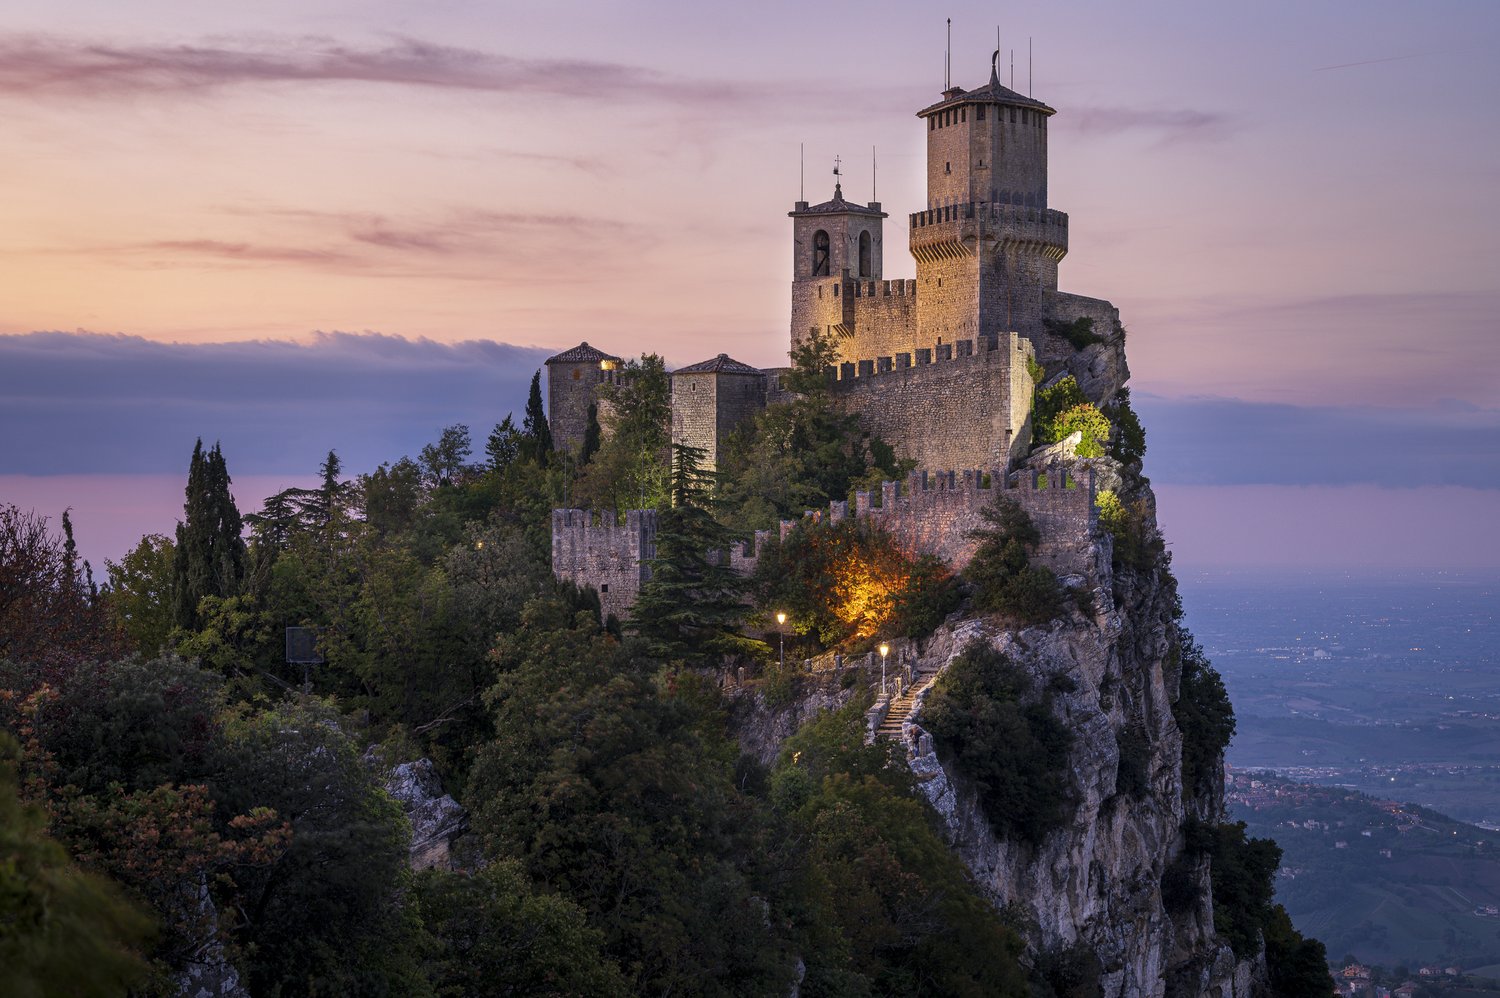 Perched atop of the Monte Titano lies three castle fortresses that guard the ancient city of San Marino. The oldest and most famous of these towers is the Fortress of Guaita.